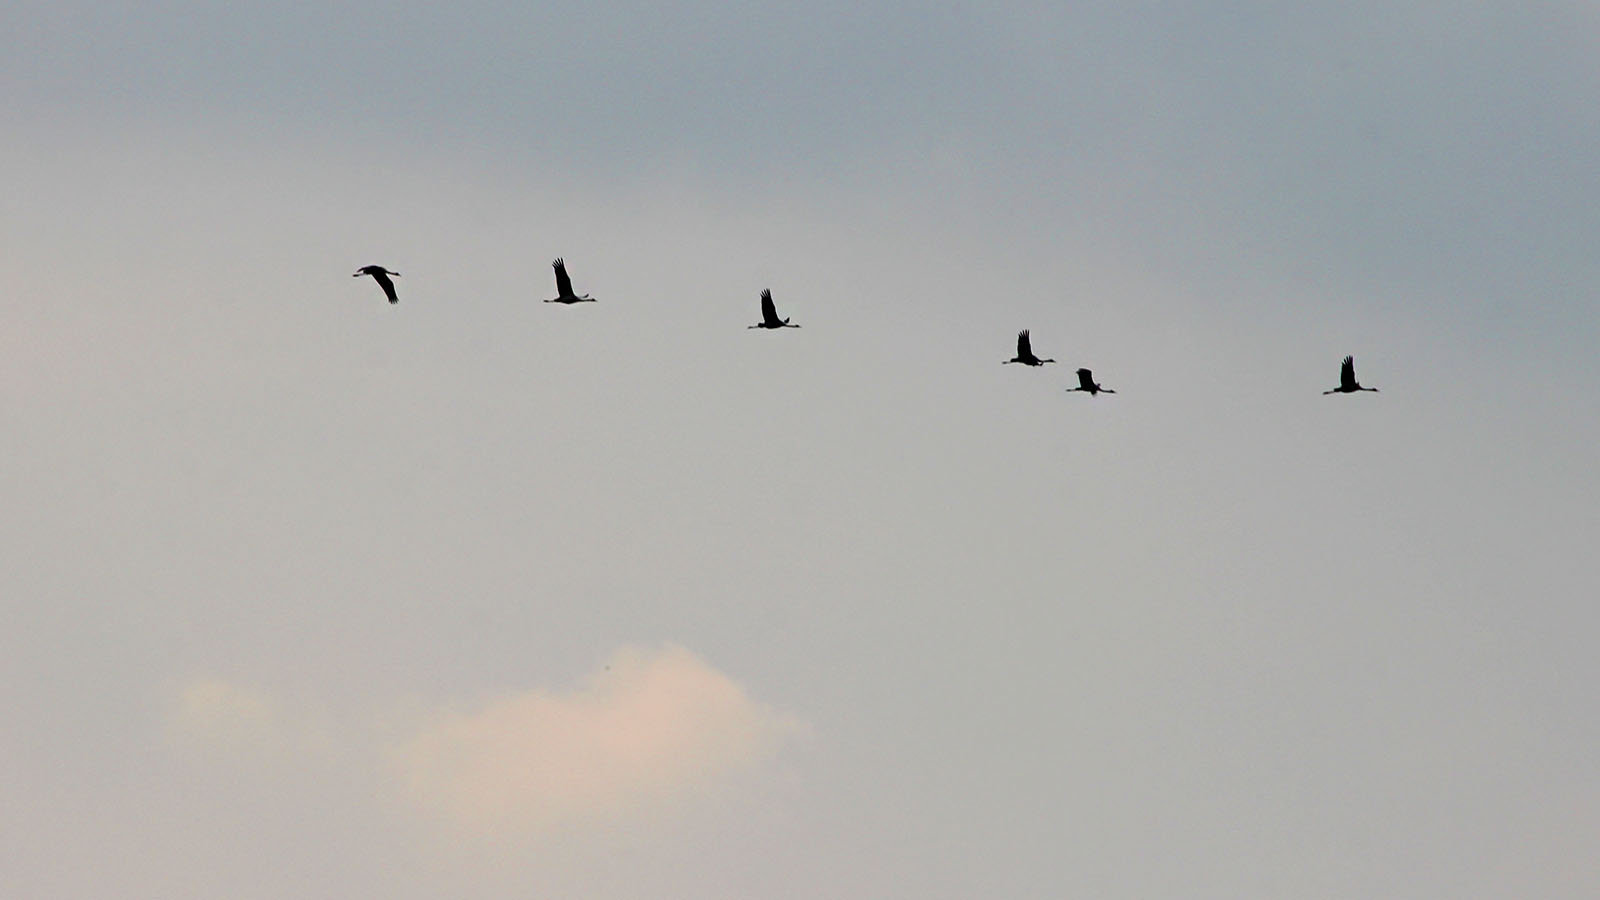 there are many birds that are flying together in the sky